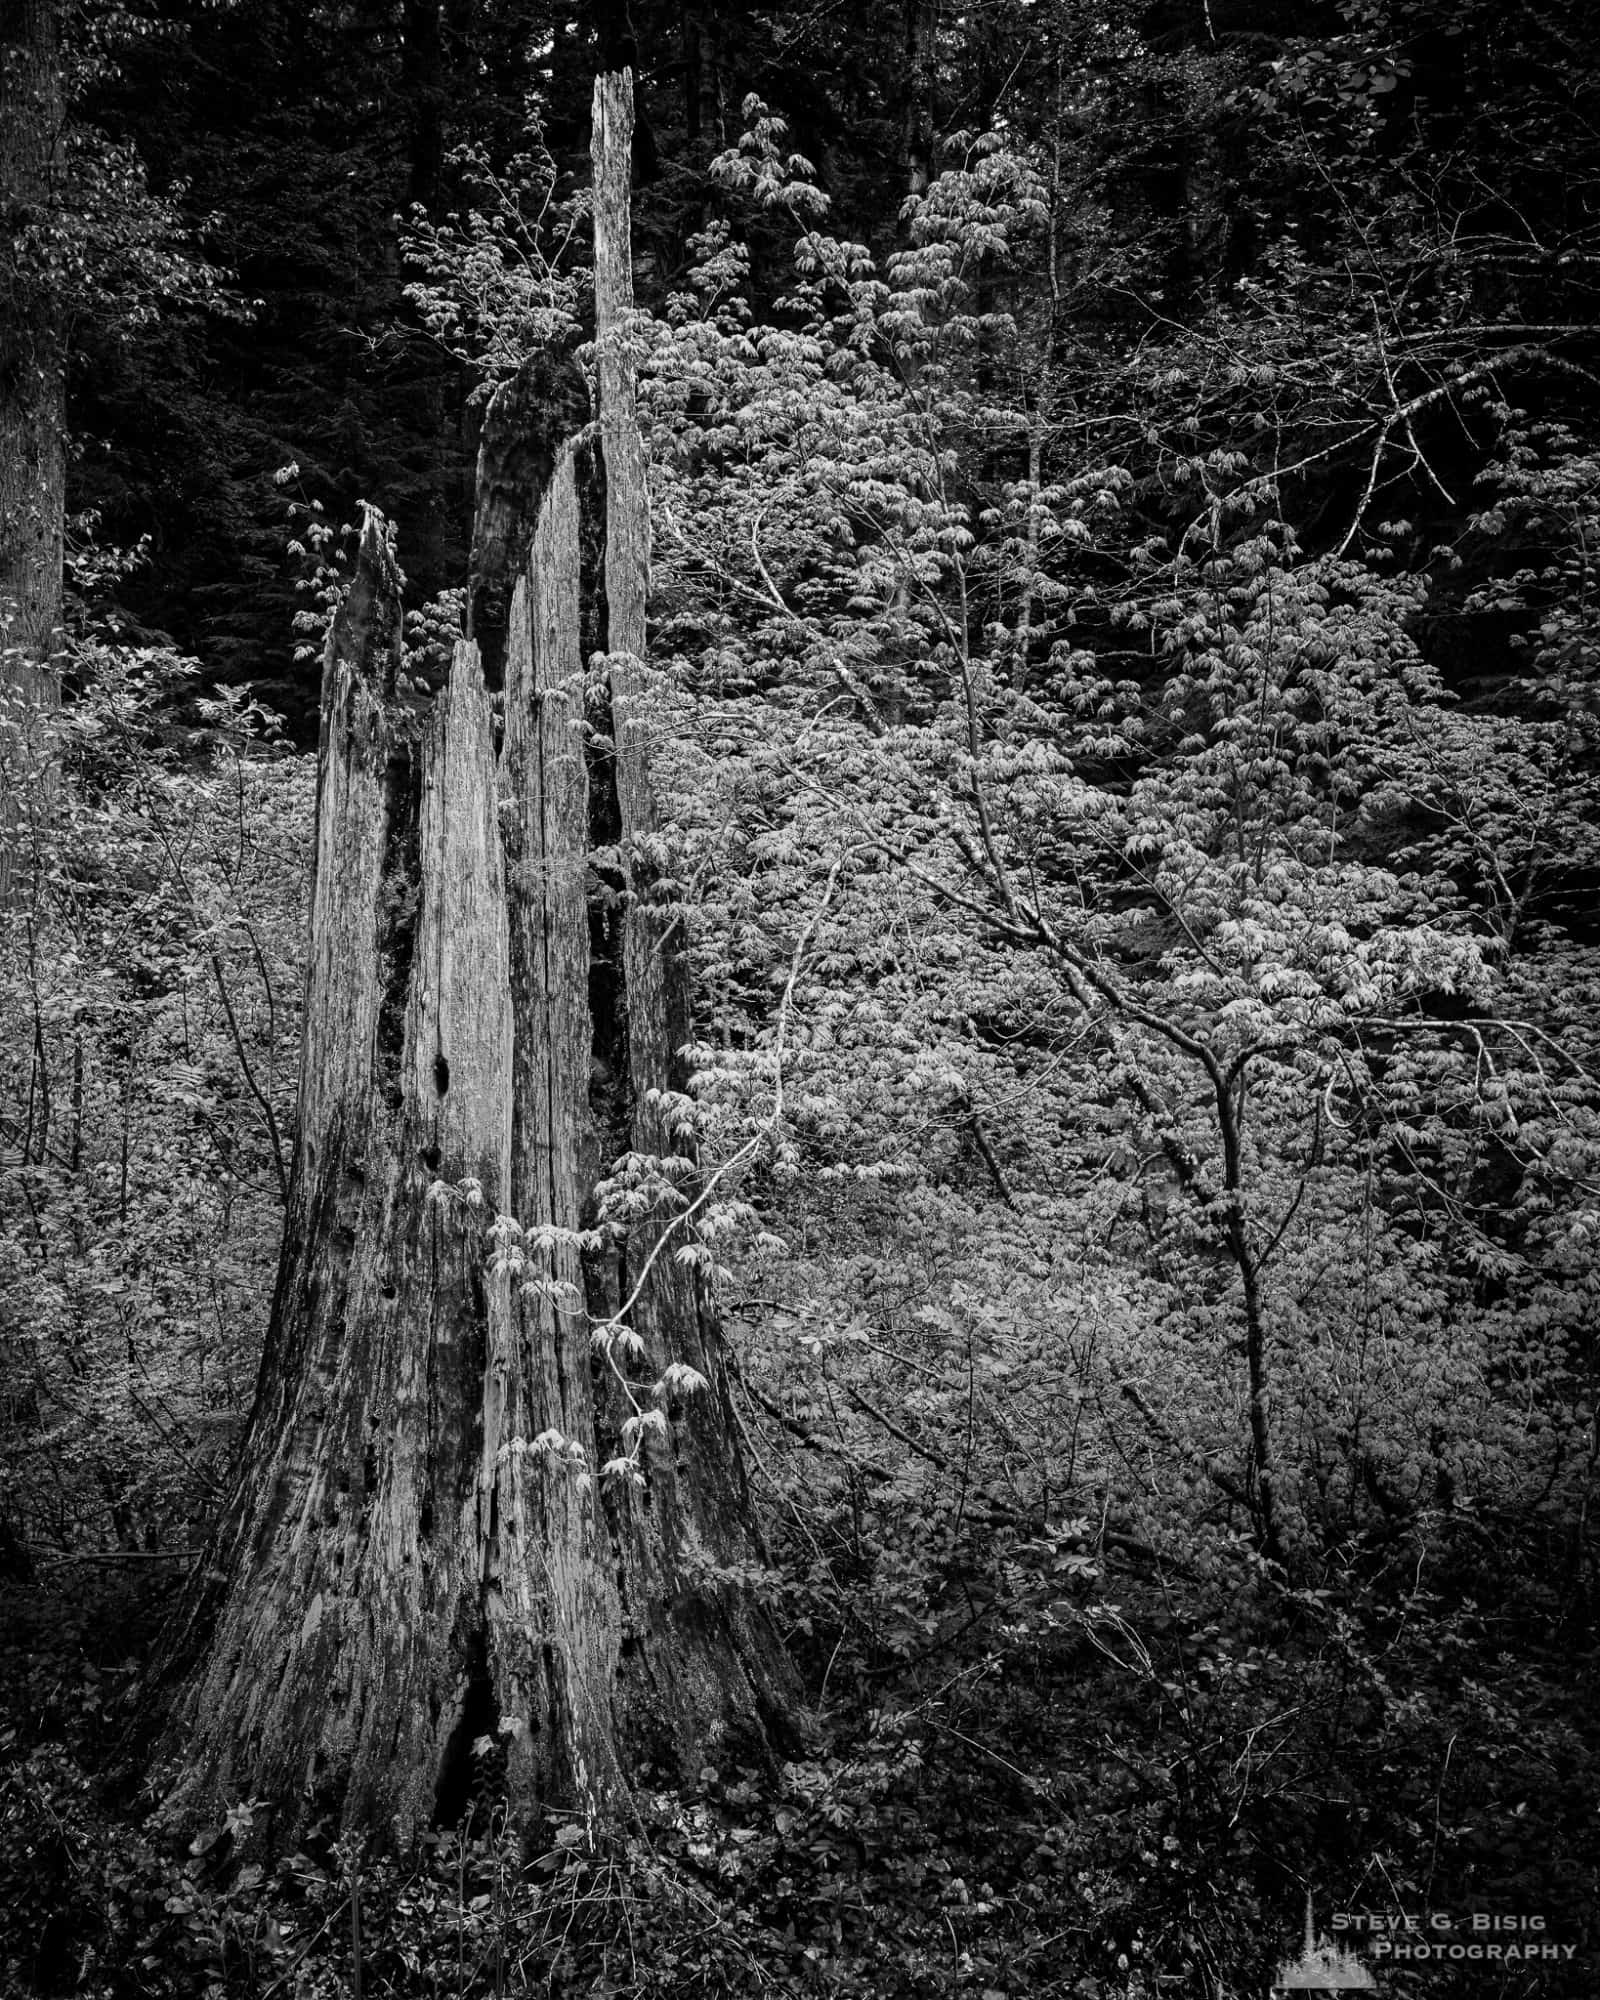 A black and white landscape photograph of an old-growth stump found along Forest Road 52 (Skate Creek Road) in the Gifford Pinchot National Forest, Washington.